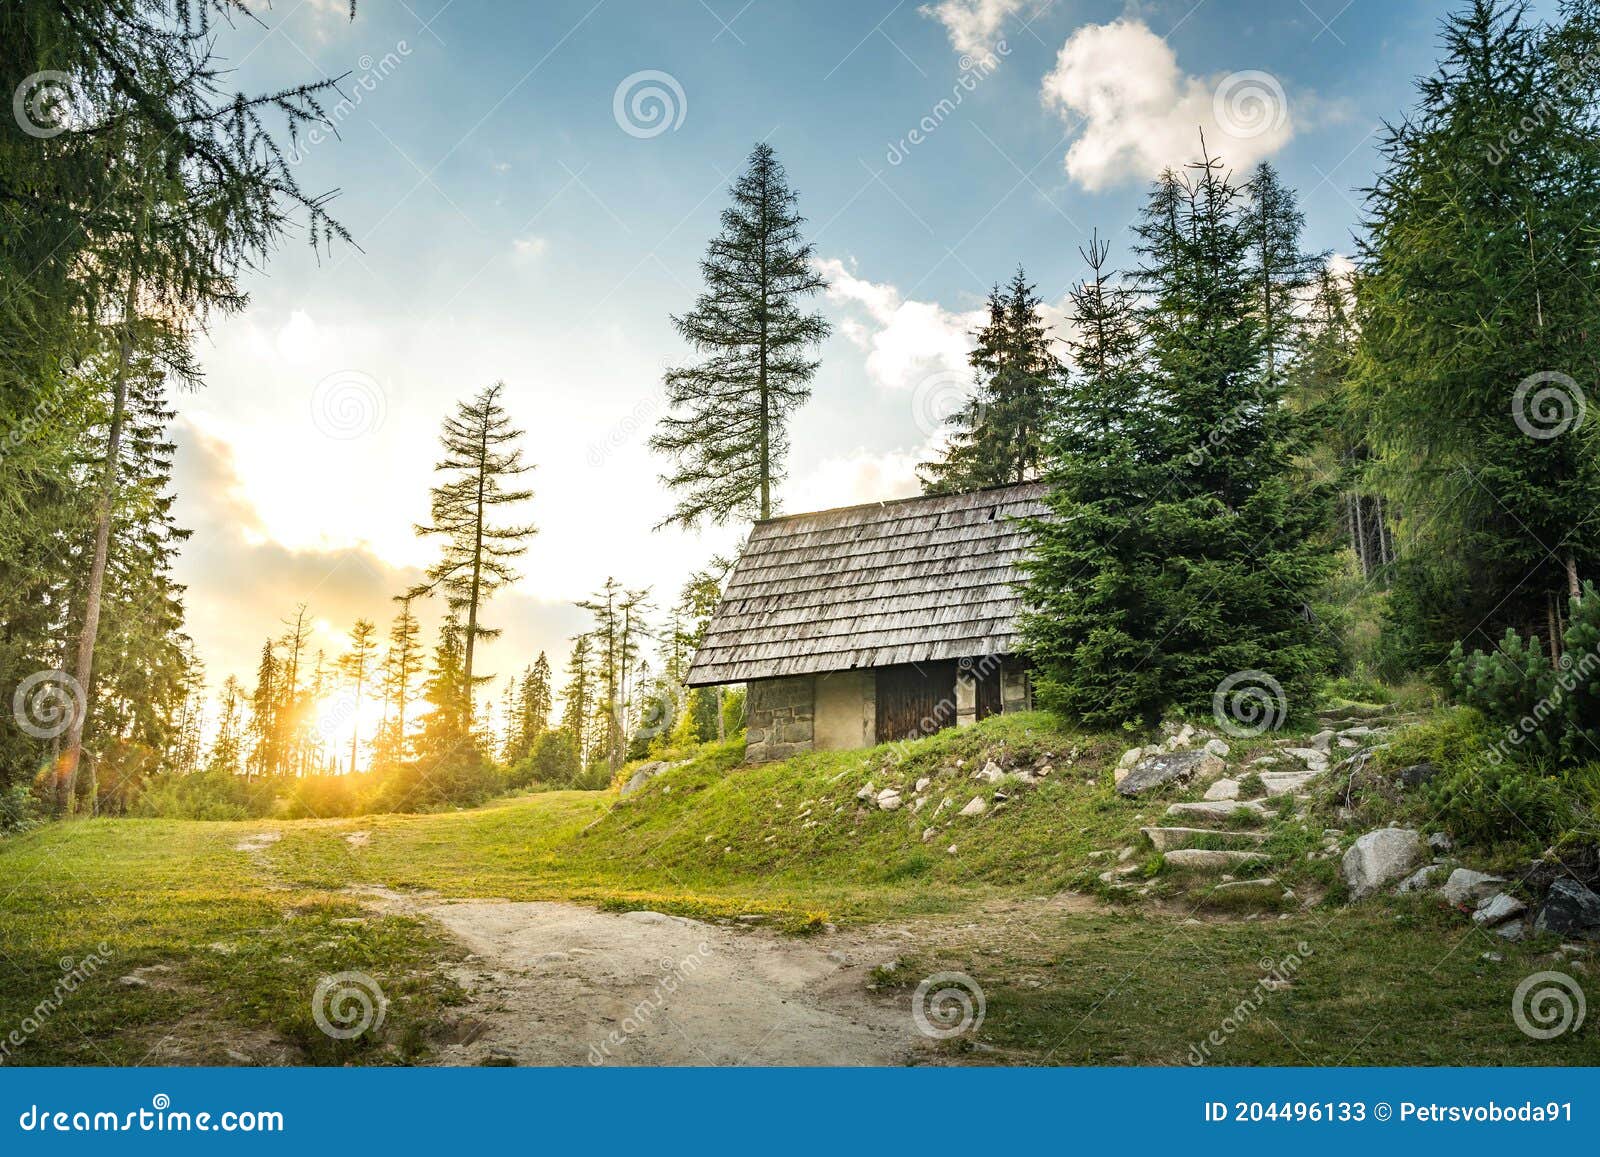  cabin in mountains surrounded by deep forrest, sunset in background with sunrays. slovakia tatra mountains